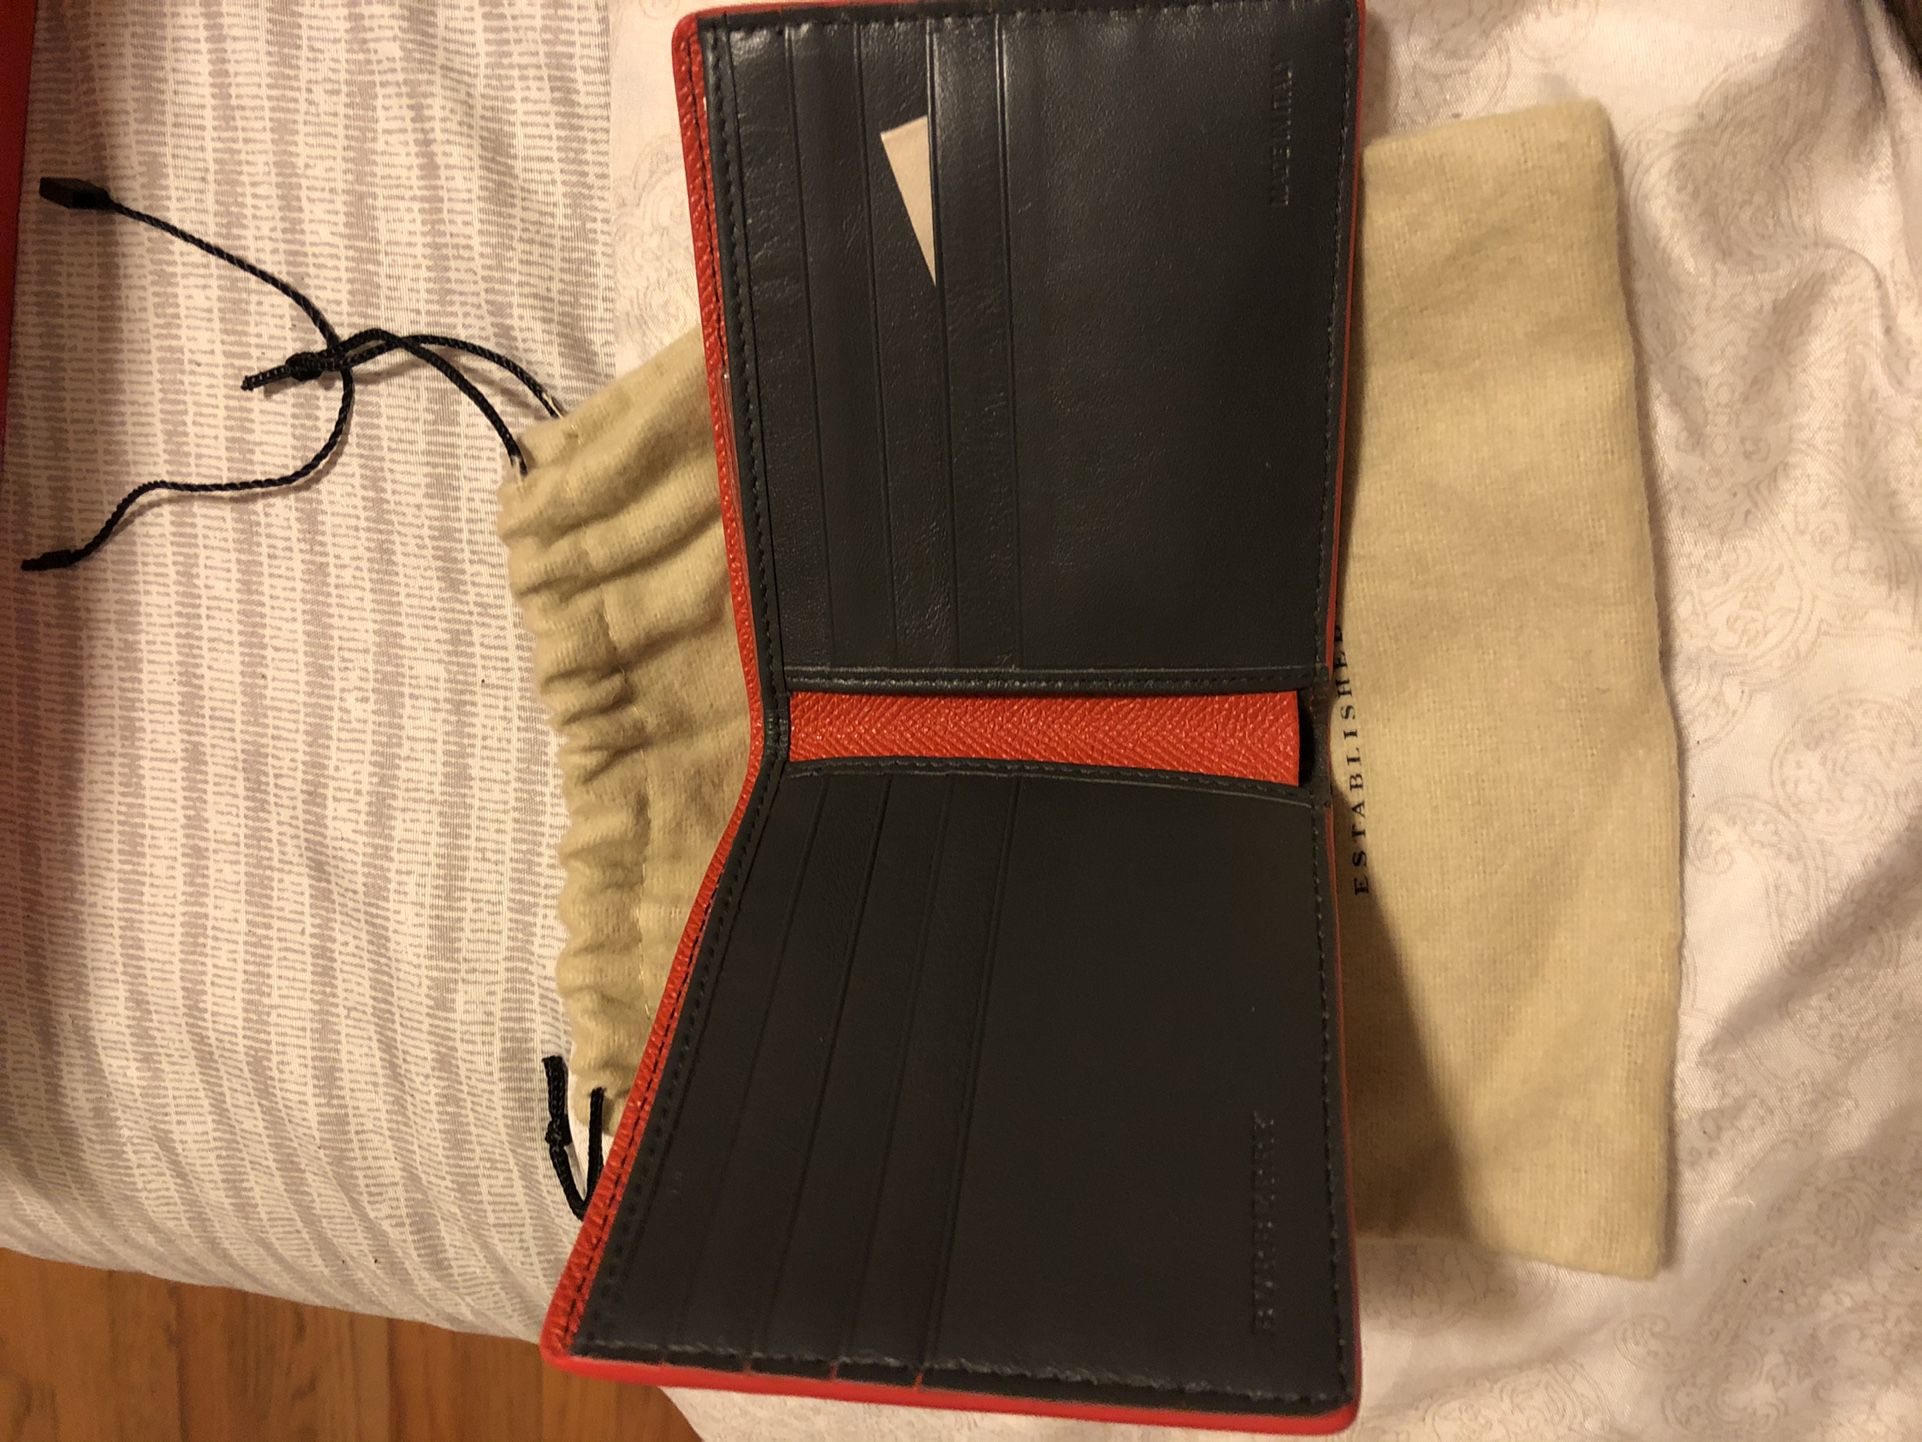 Burberry Wallet for Sale in Lynwood, CA - OfferUp